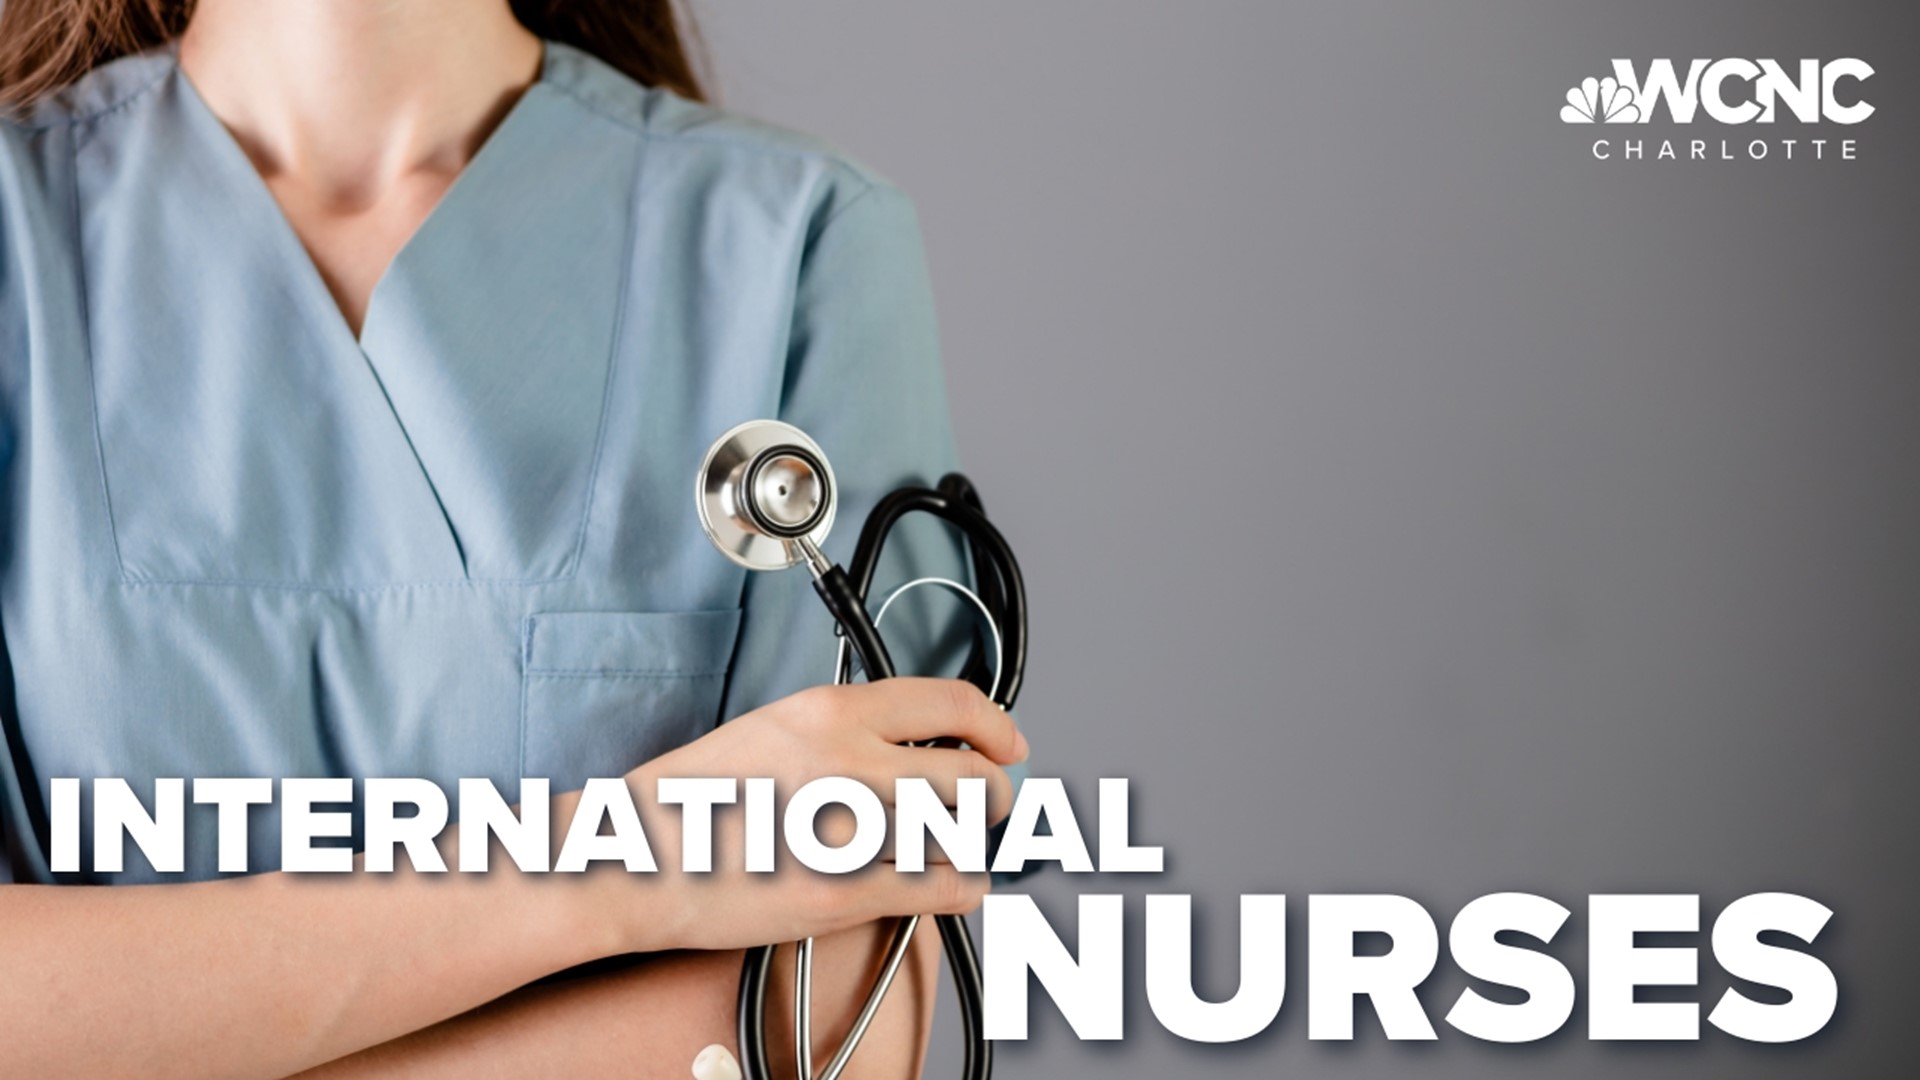 Researchers at UNC found 10 years from now, North Carolina could be short tens of thousands of nurses.